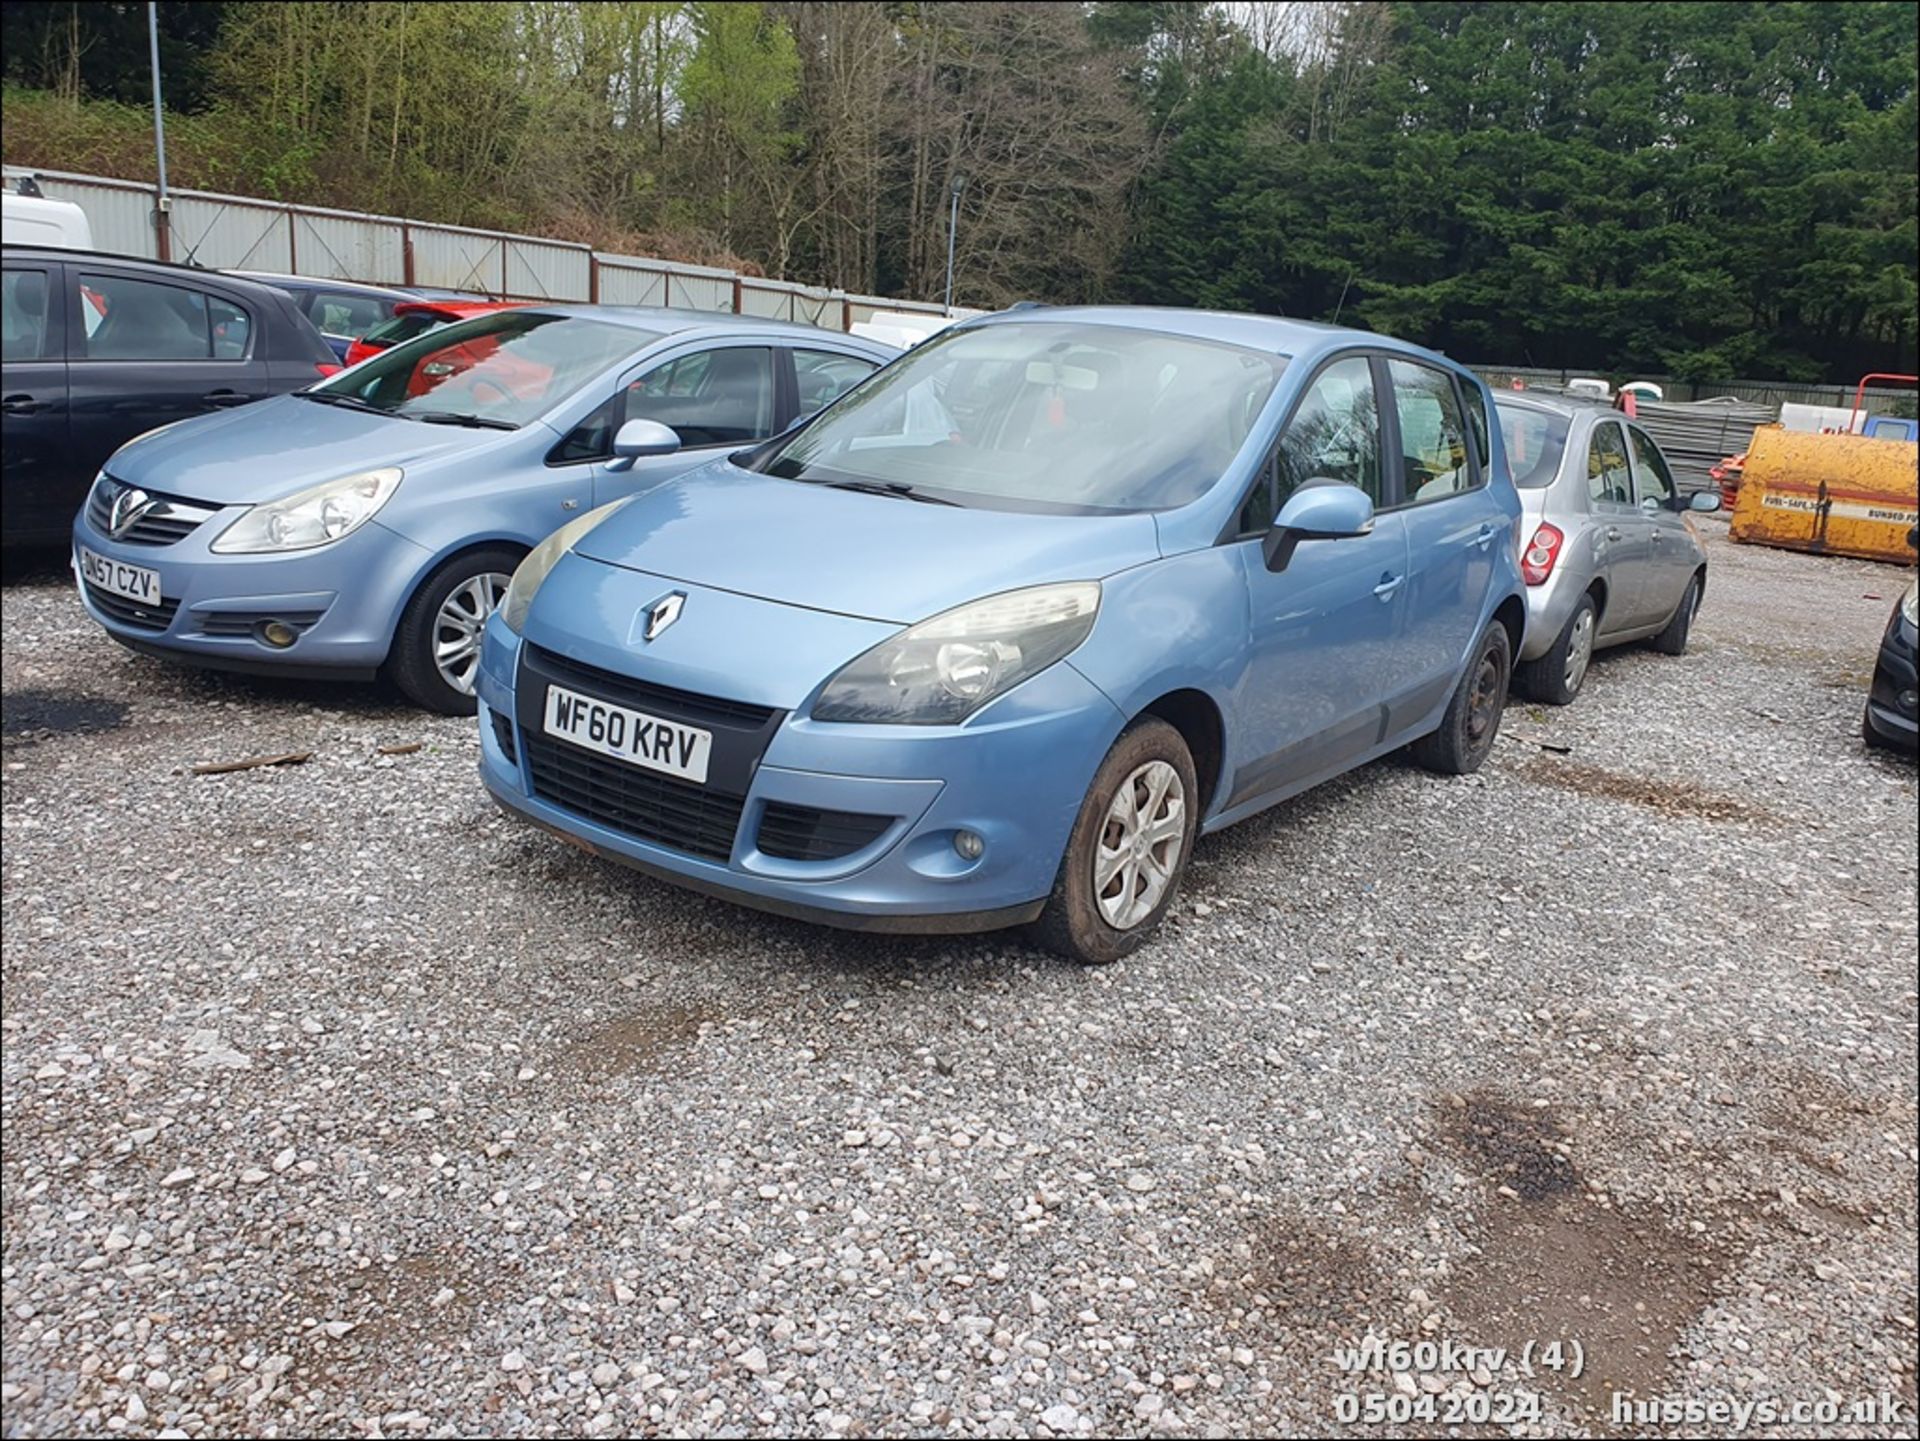 10/60 RENAULT SCENIC EXPRESSION DCI 105 - 1461cc 5dr MPV (Blue) - Image 5 of 50